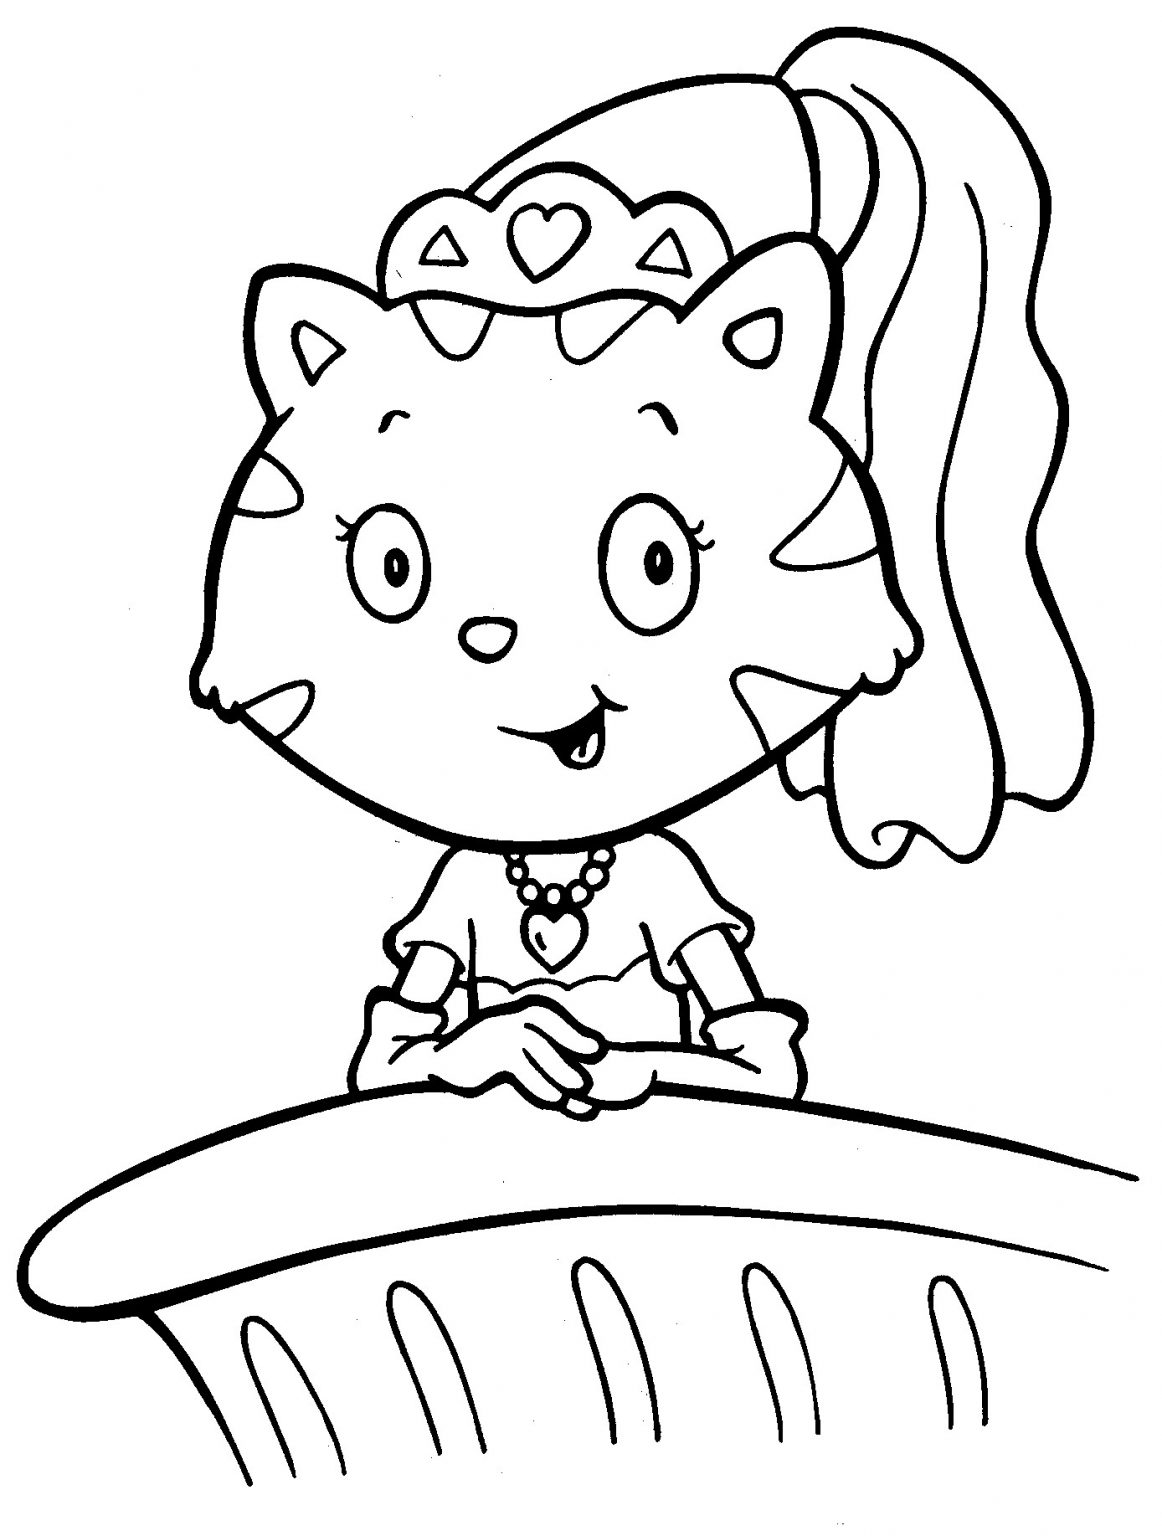 Baby Cat Coloring Pages - BubaKids.com